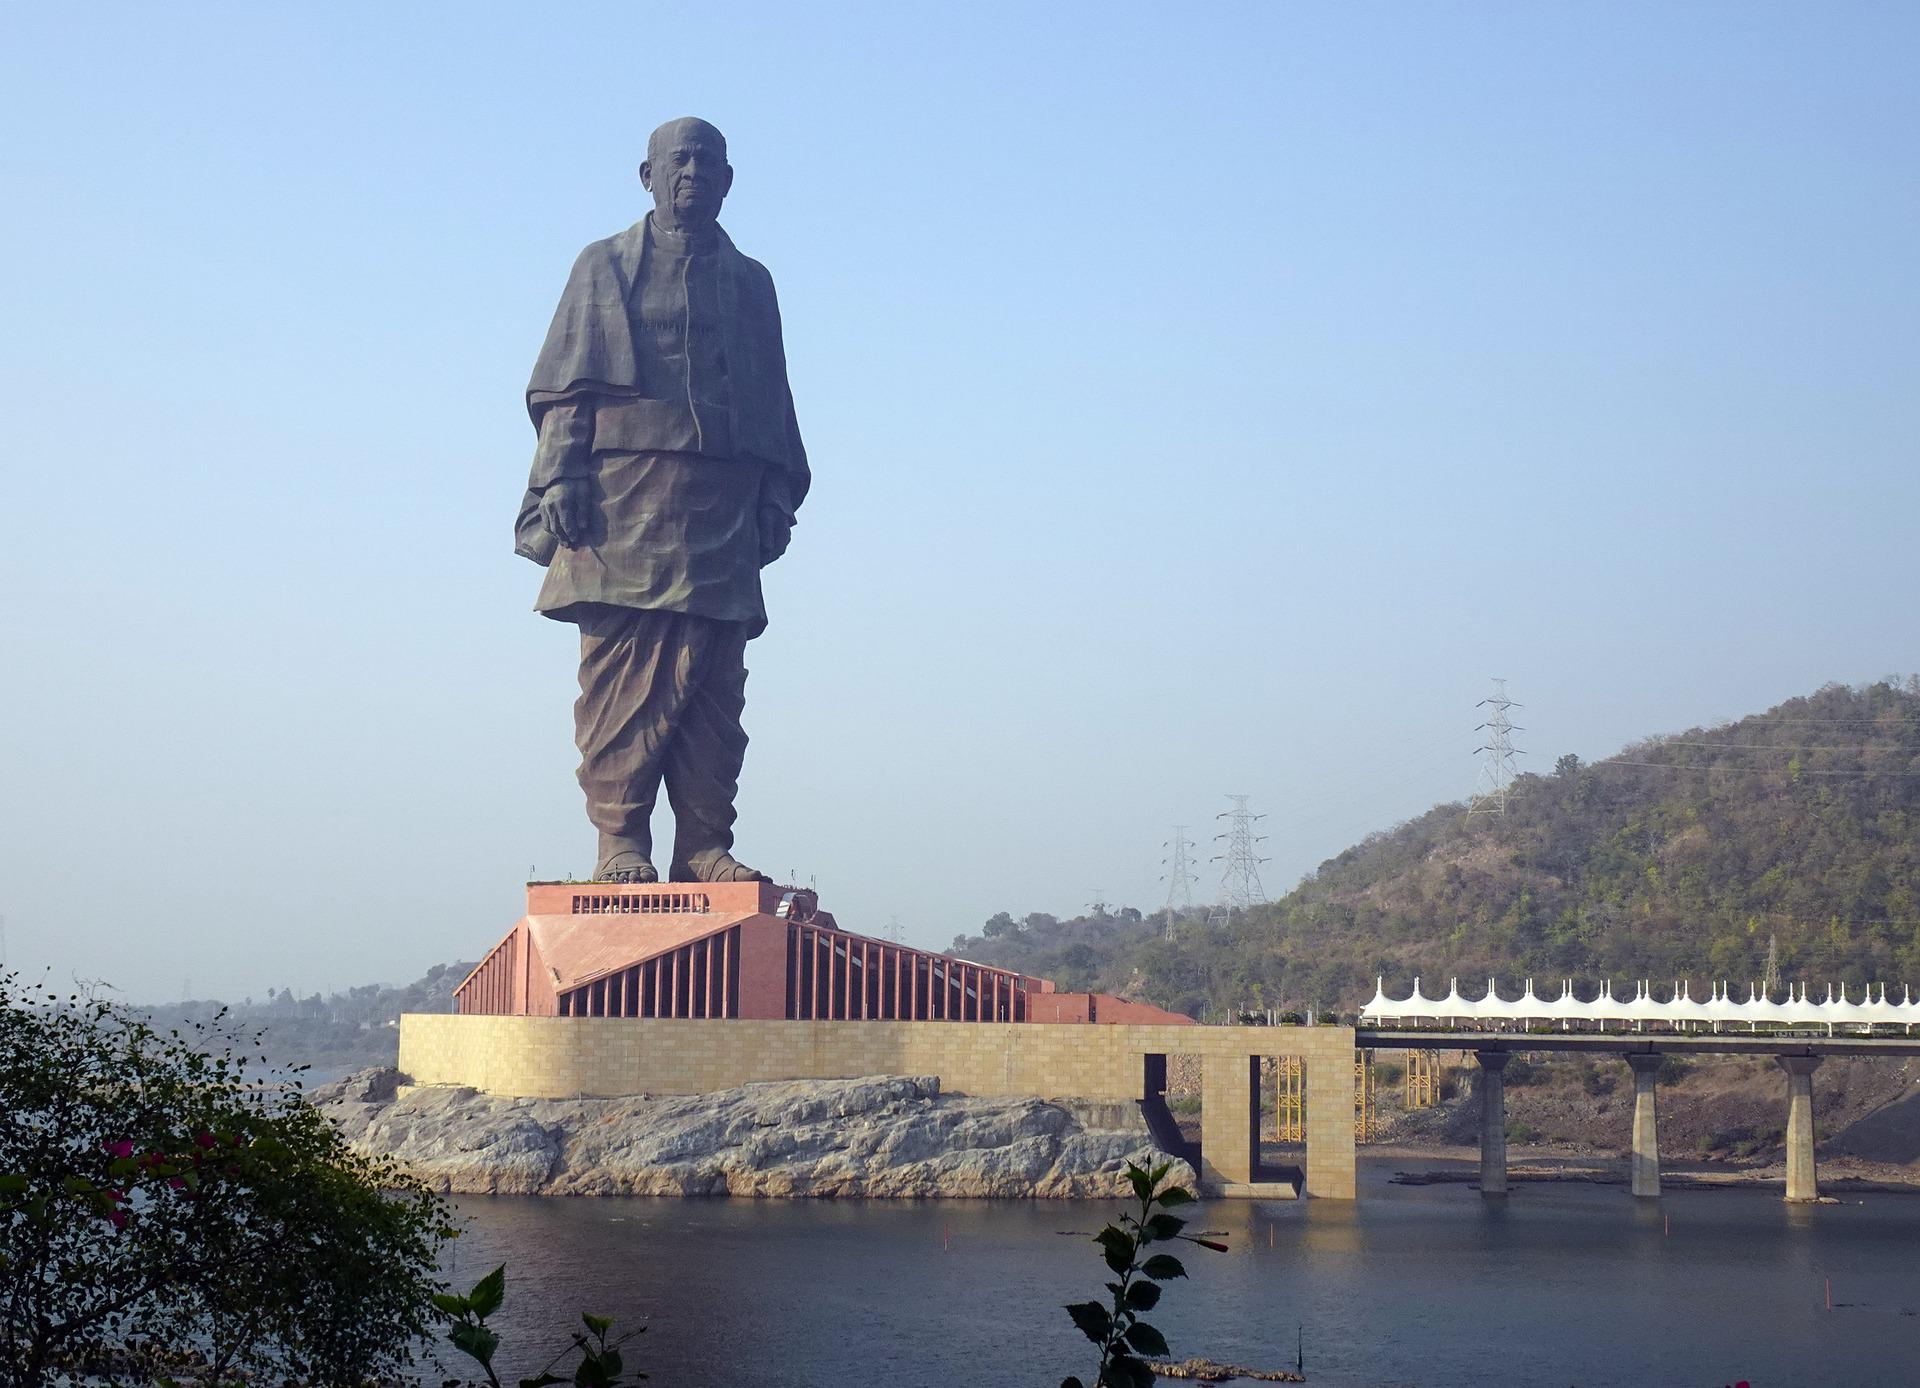 One day trip to Statue of Unity